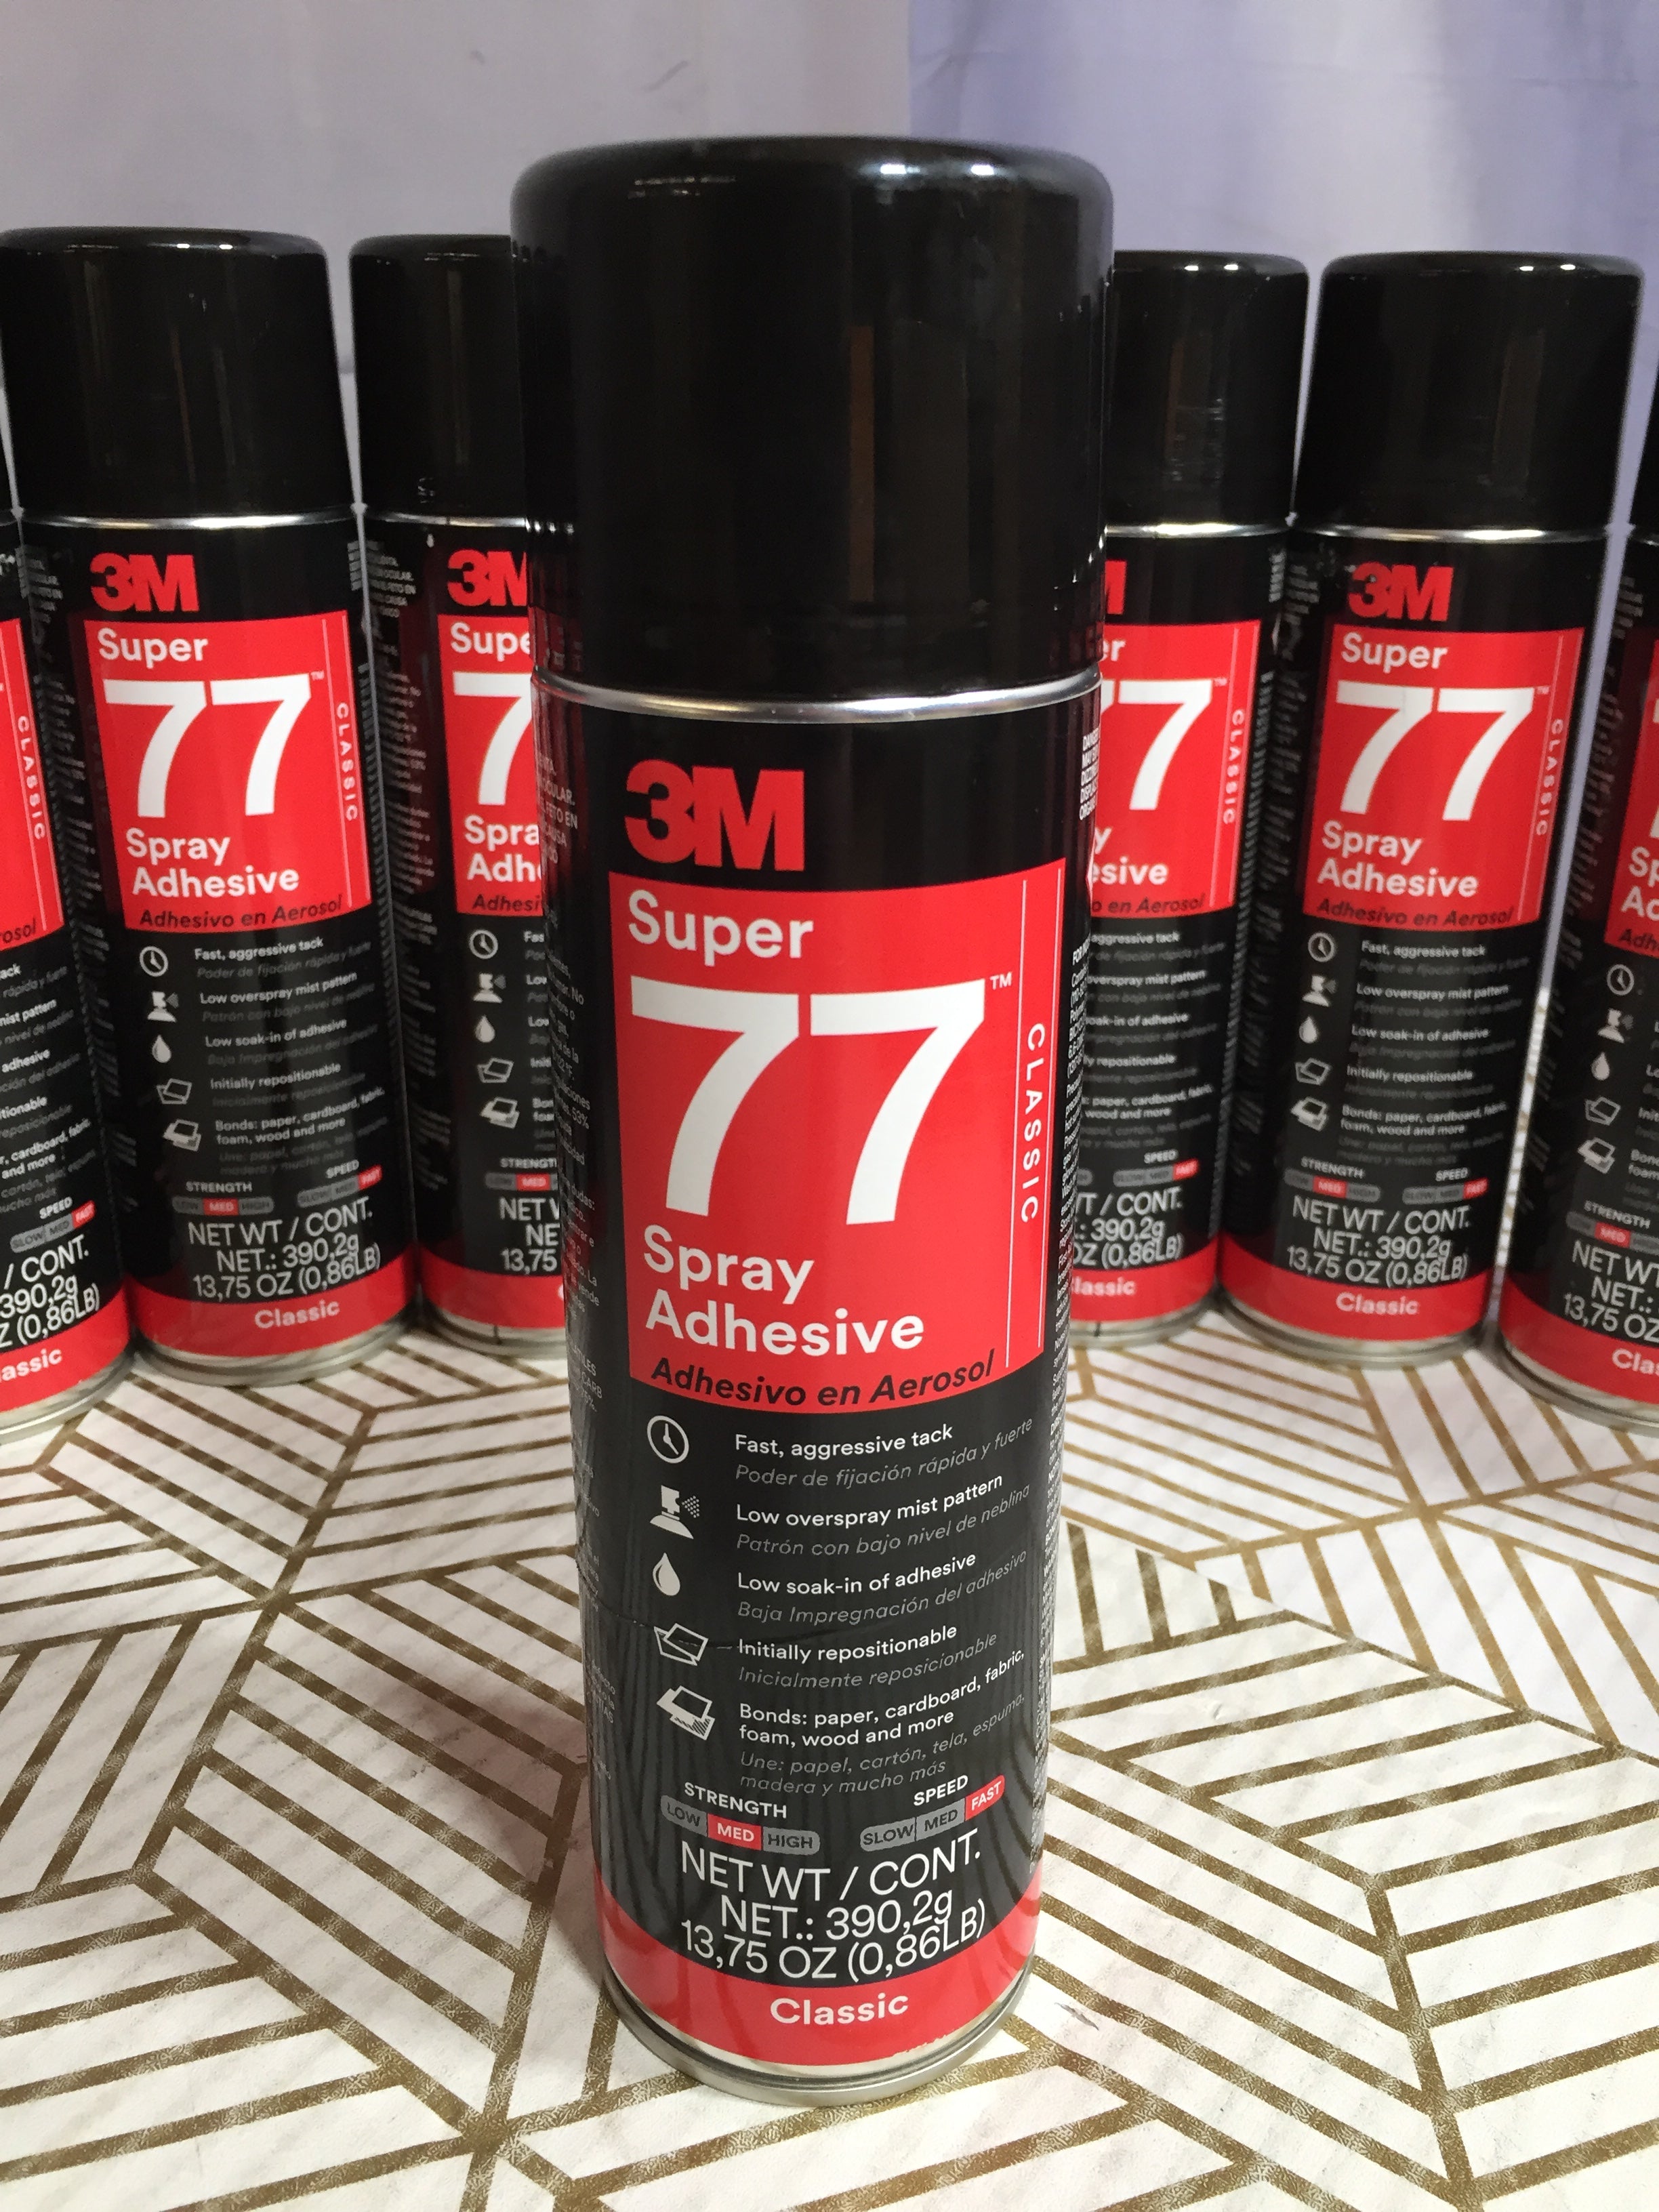 3M SUPER 77 Spray Adhesive Classic | 12 CANS | **EXPIRED** (8190647501038)